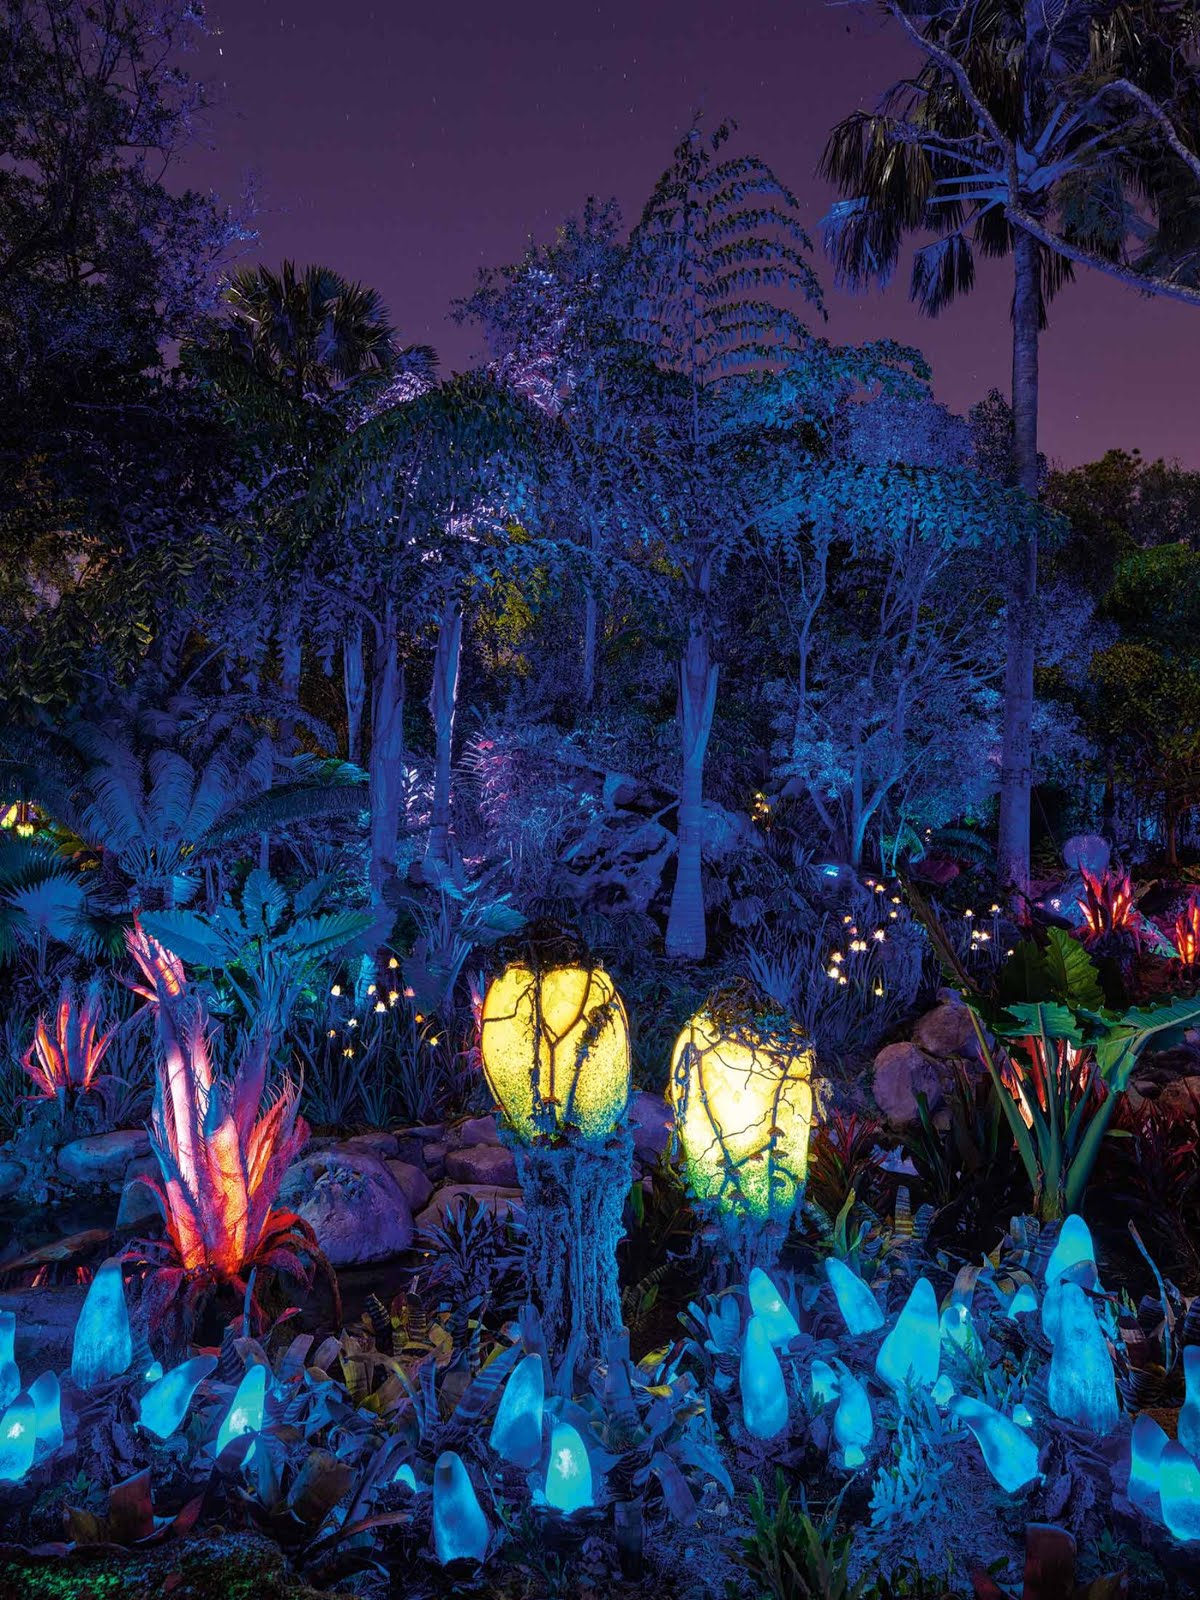 and more: Latest About Pandora: The World Avatar !